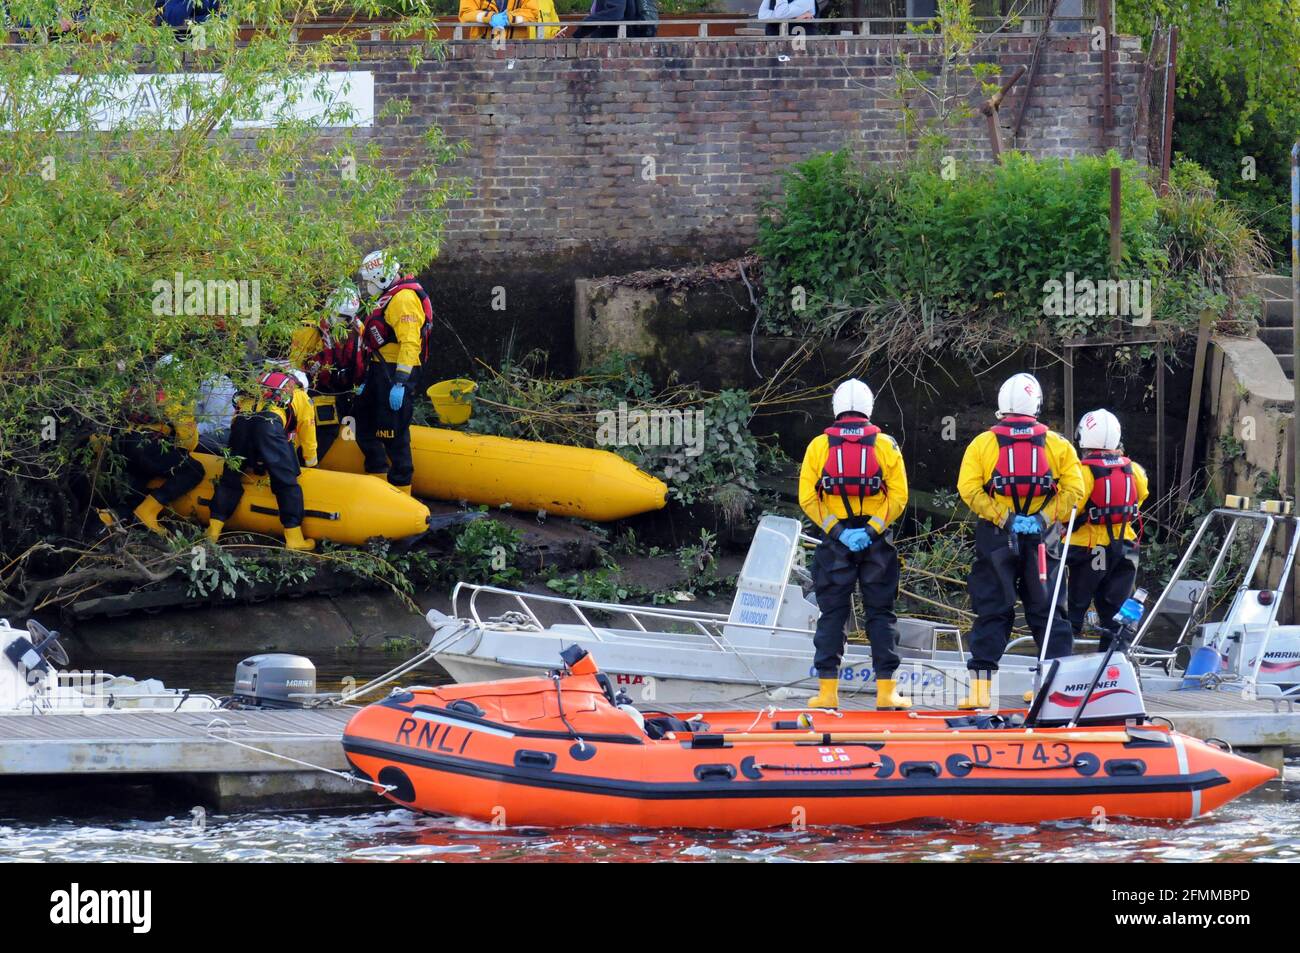 London, UK, 10 May 2021 RnLI members stand at attention as the young Minke whale is euthanized. Minke whale at Teddington Lock in the Thames. Credit: JOHNNY ARMSTEAD/Alamy Live News Stock Photo